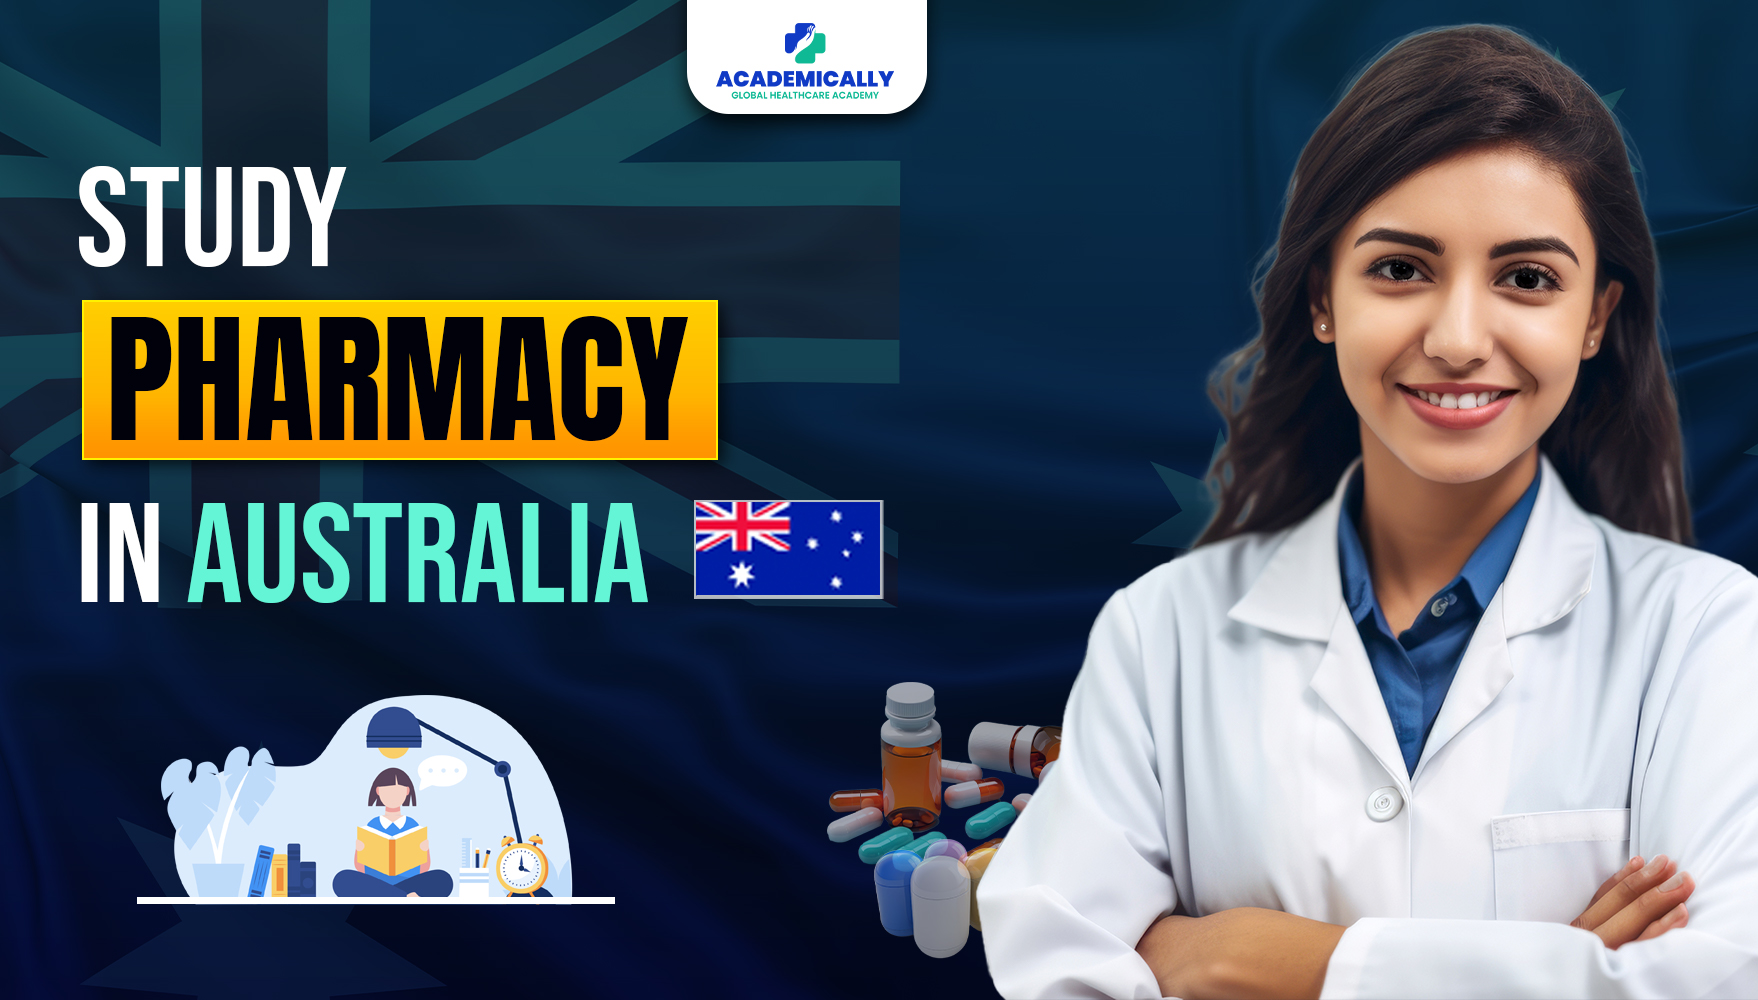 Guide to Studying Pharmacy in Australia